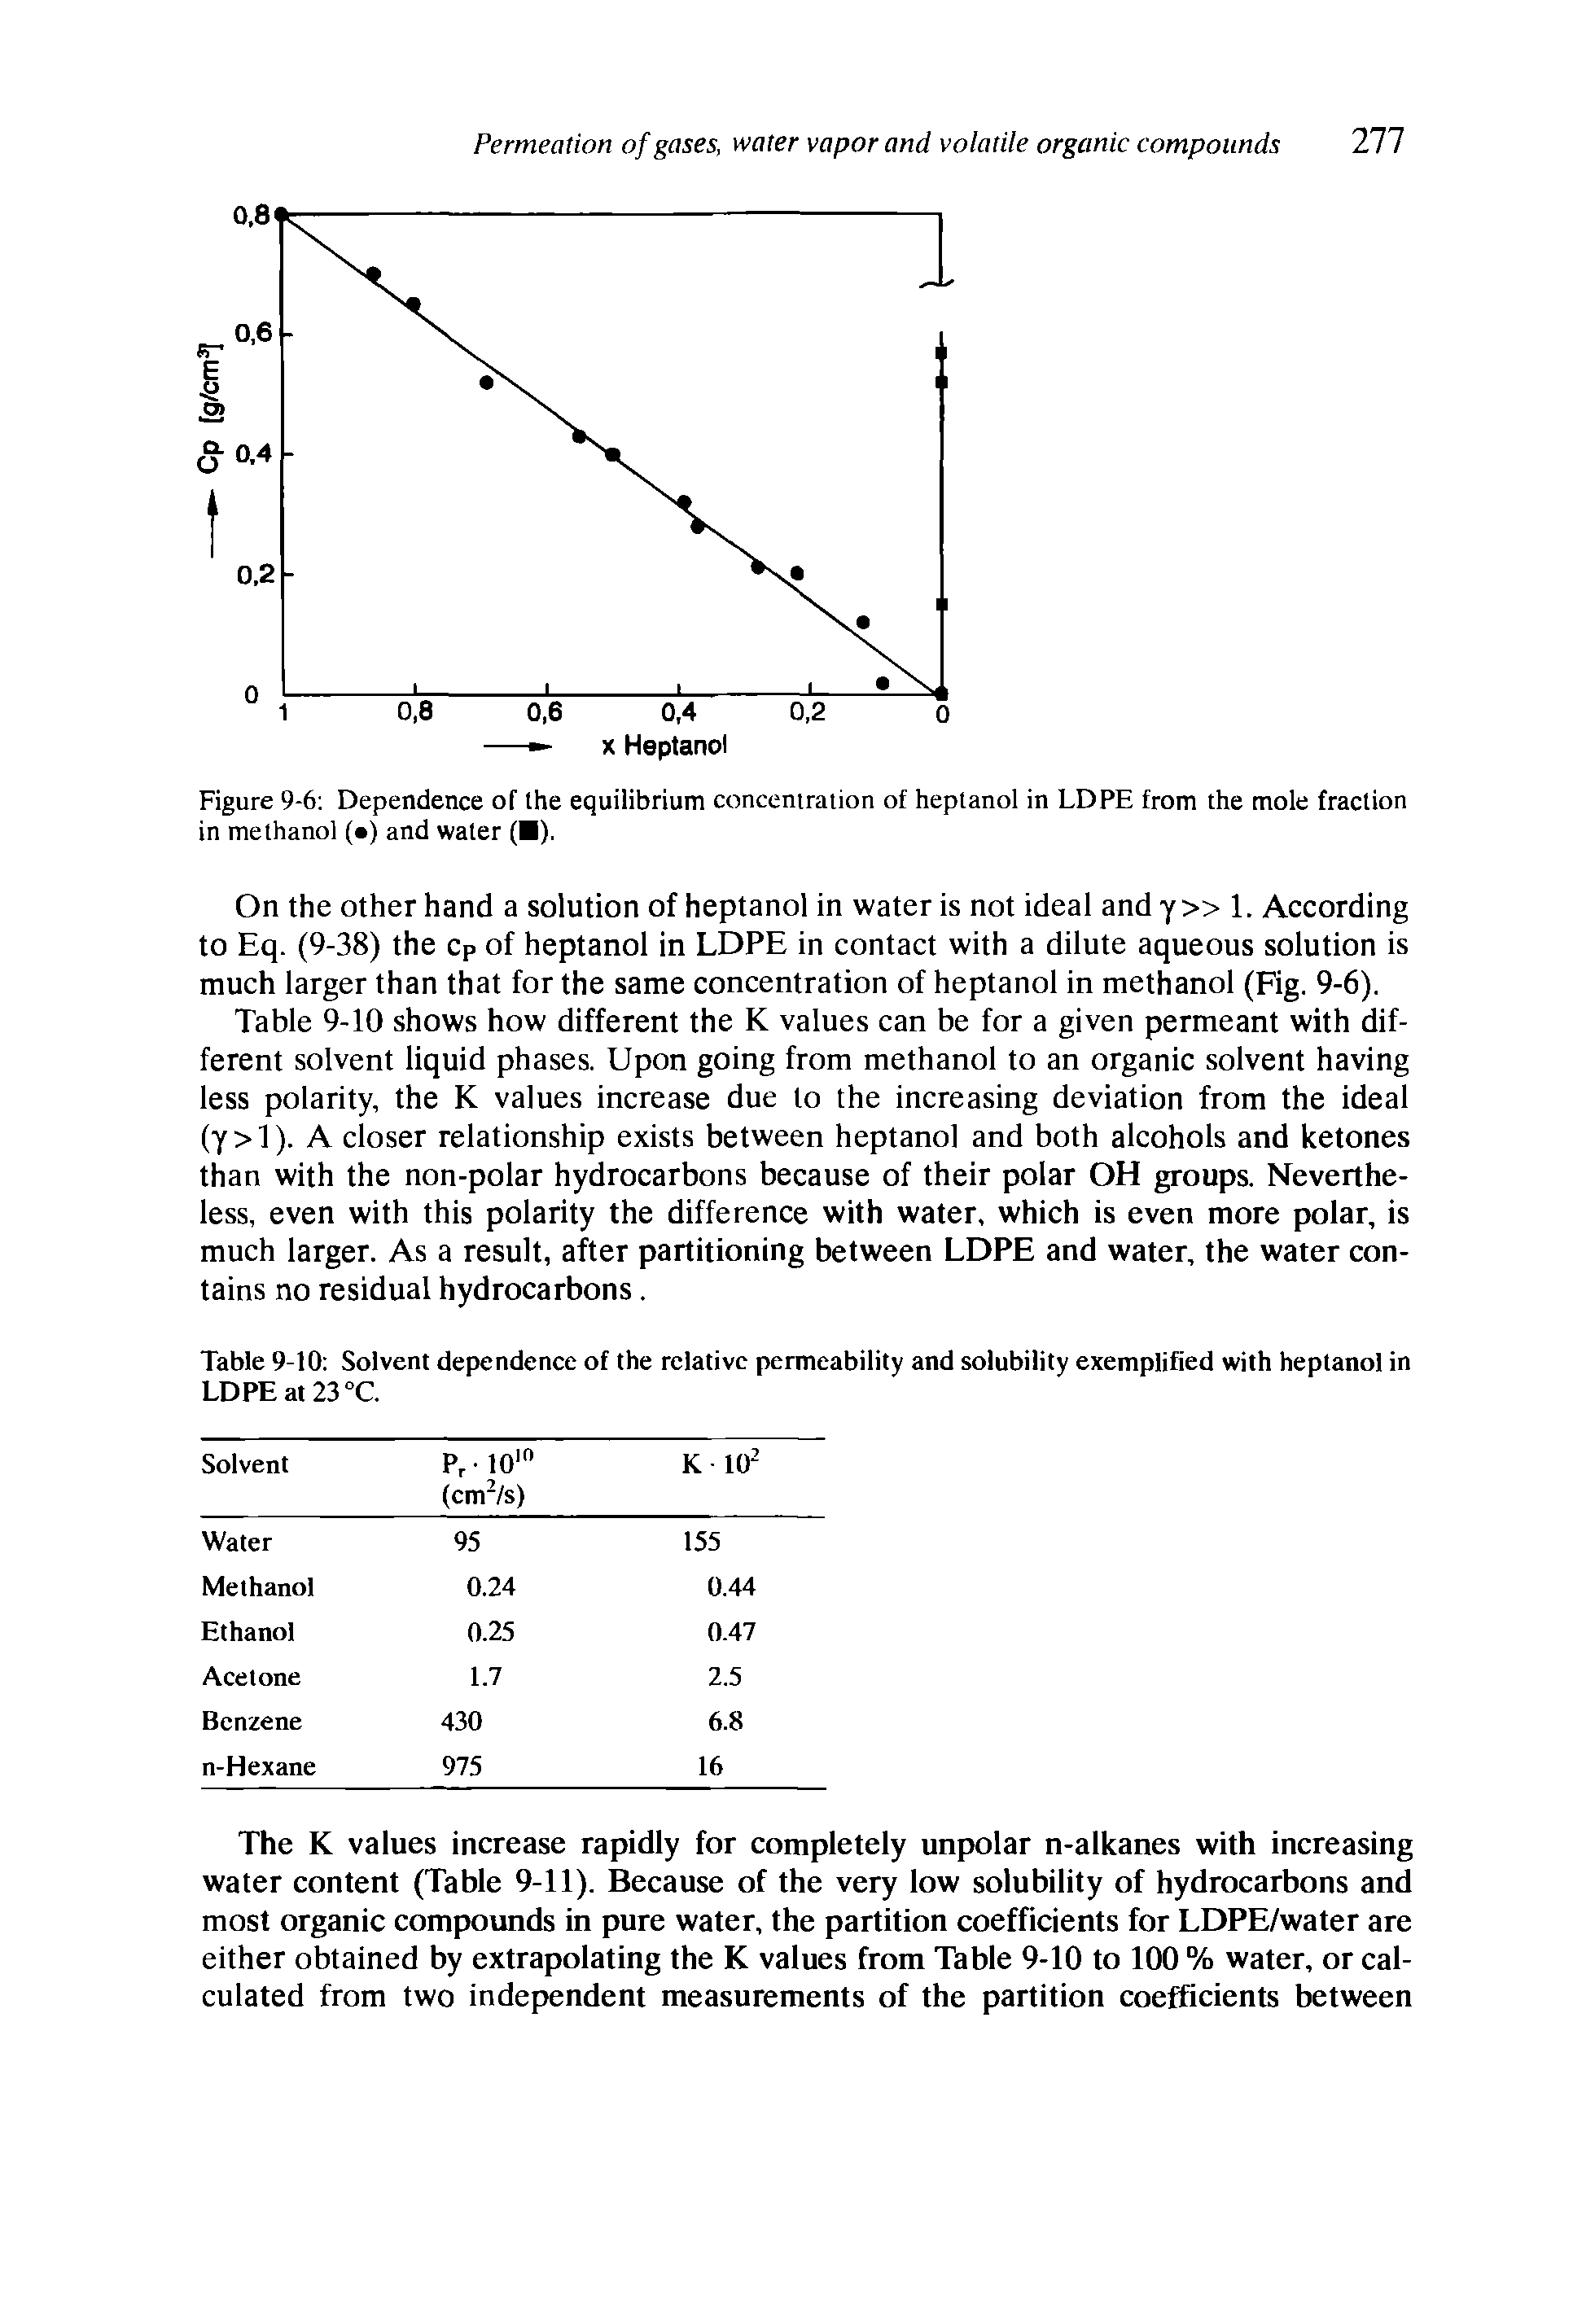 Table 9-10 Solvent dependence of the relative permeability and solubility exemplified with heptanol in LDPE at 23 °C.